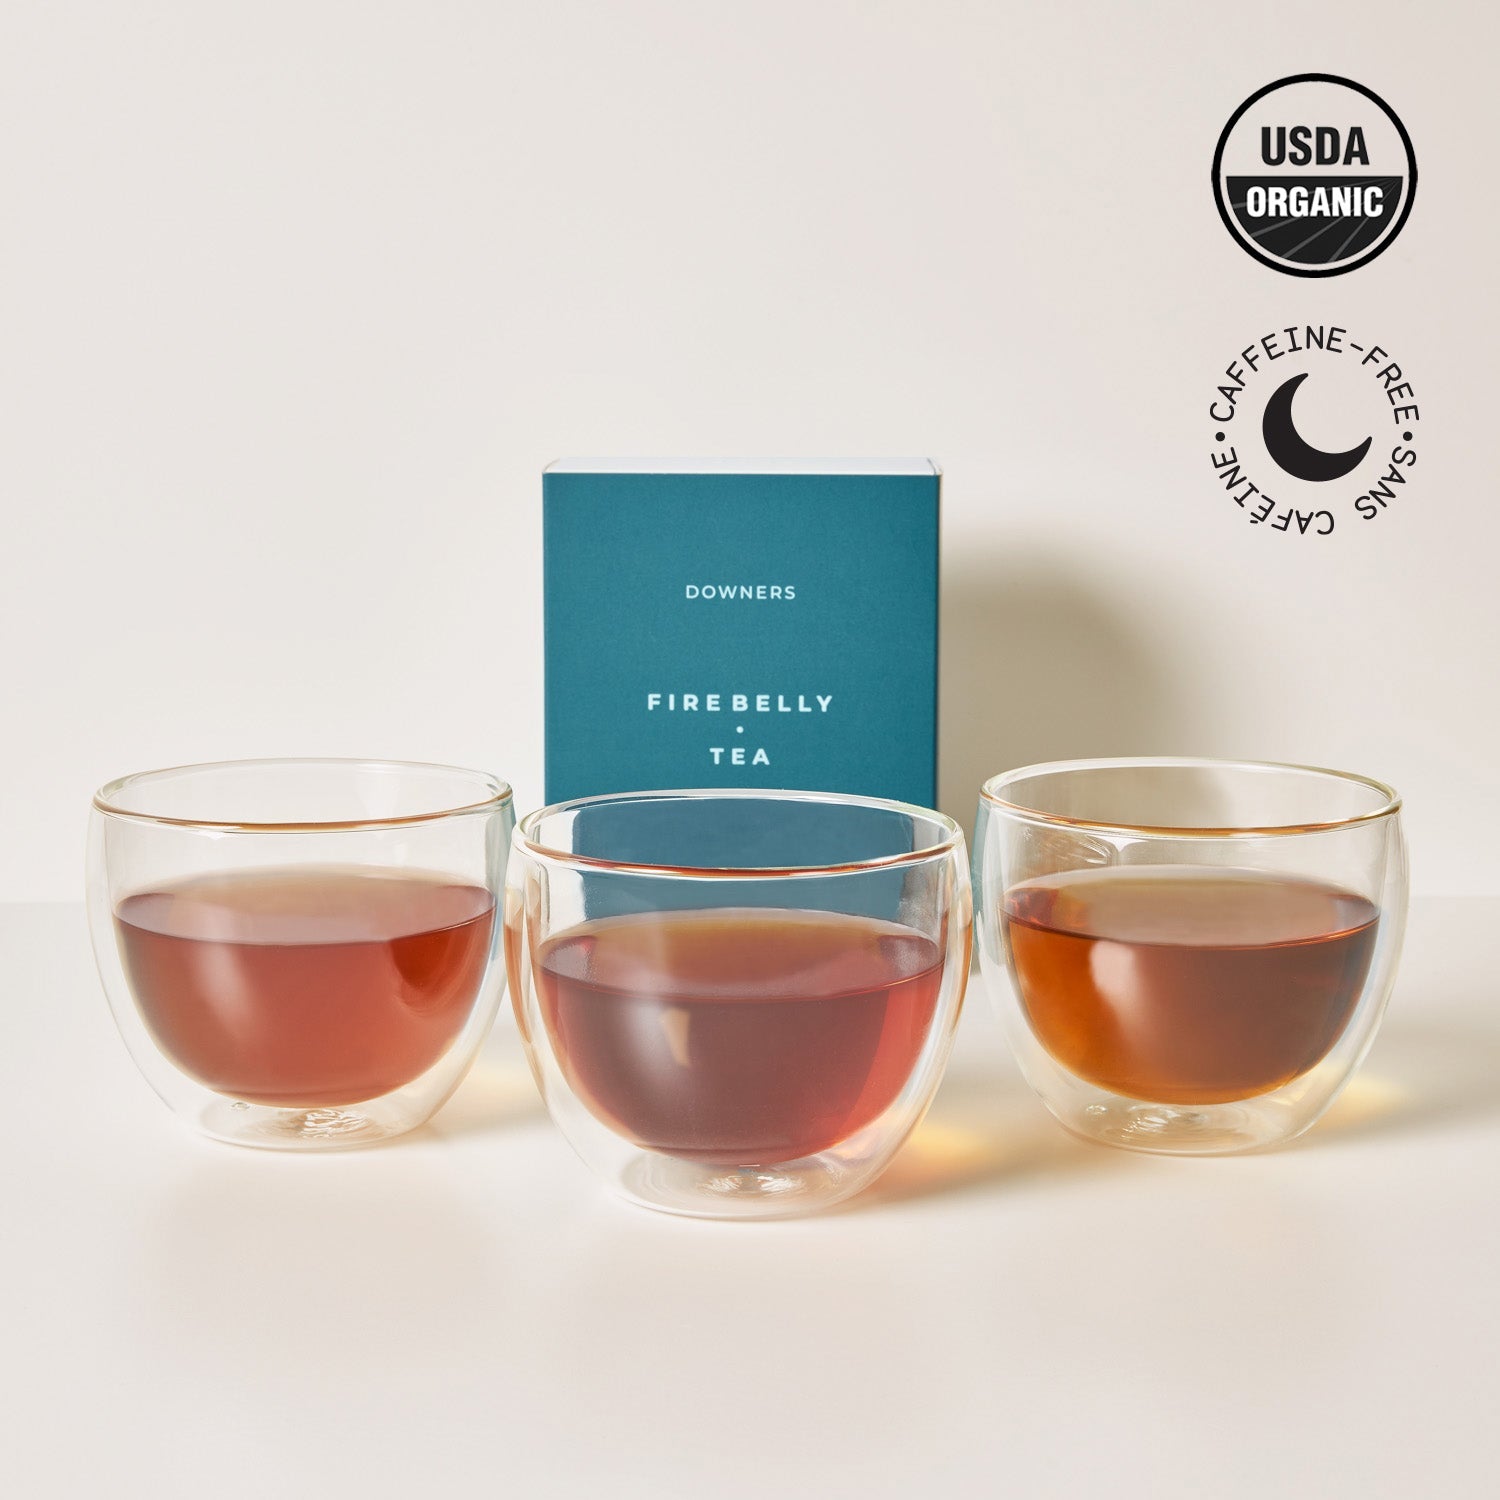 Downers - Firebelly Tea